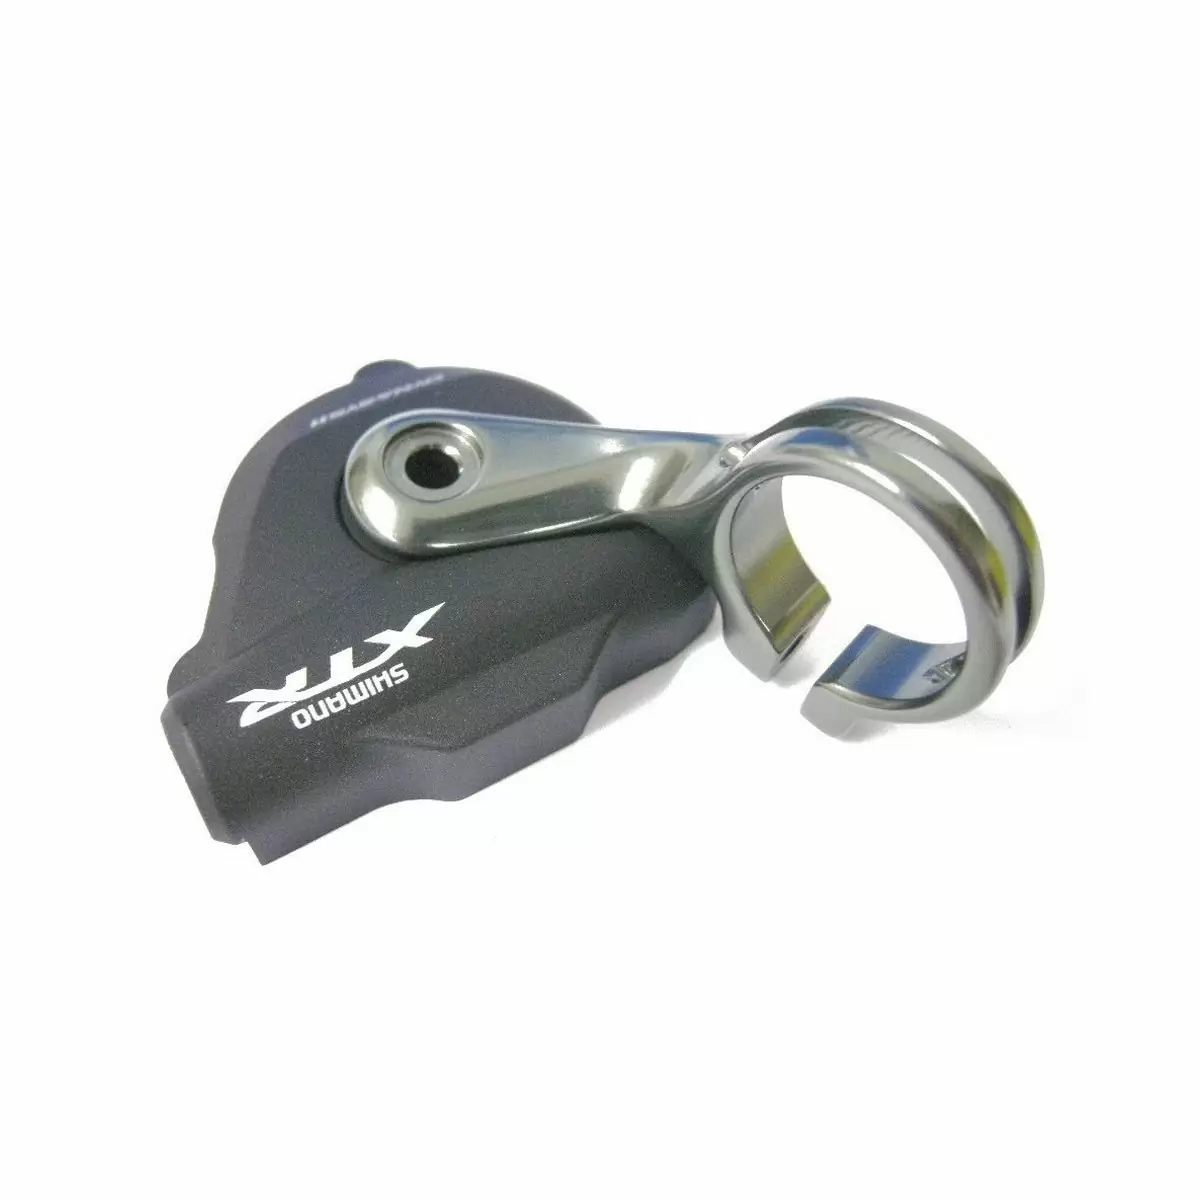 Spare cover for right-hand XTR SL-M9000 shift lever - image